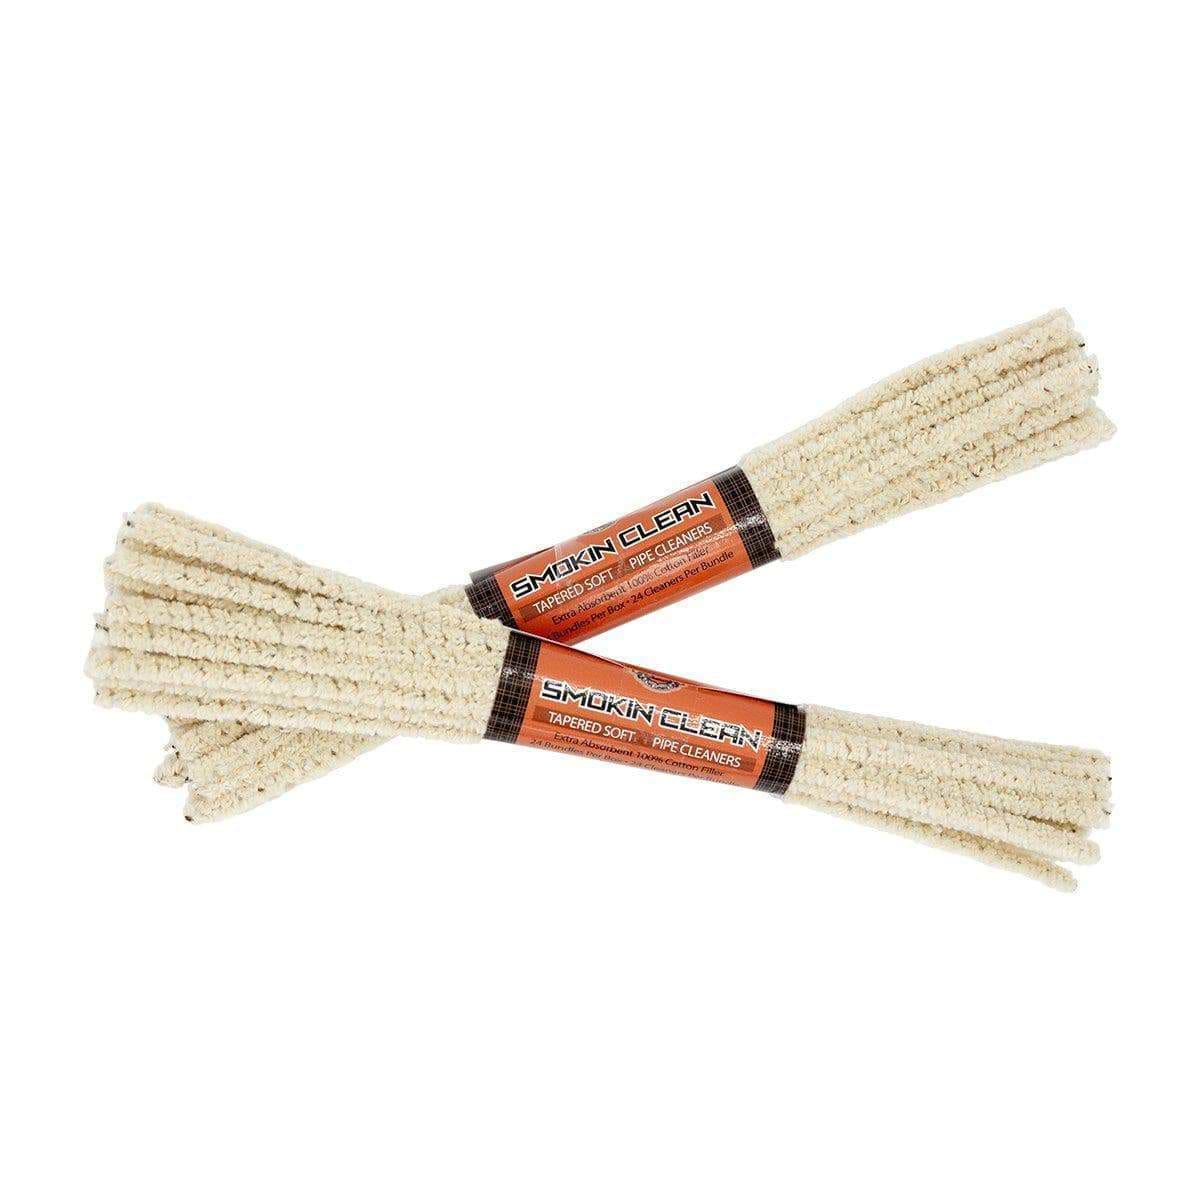 2 bundles extra-absorbent soft-tapered bristle pipe smoking device cleaners made of 100% cotton filler Smokin Clean logo